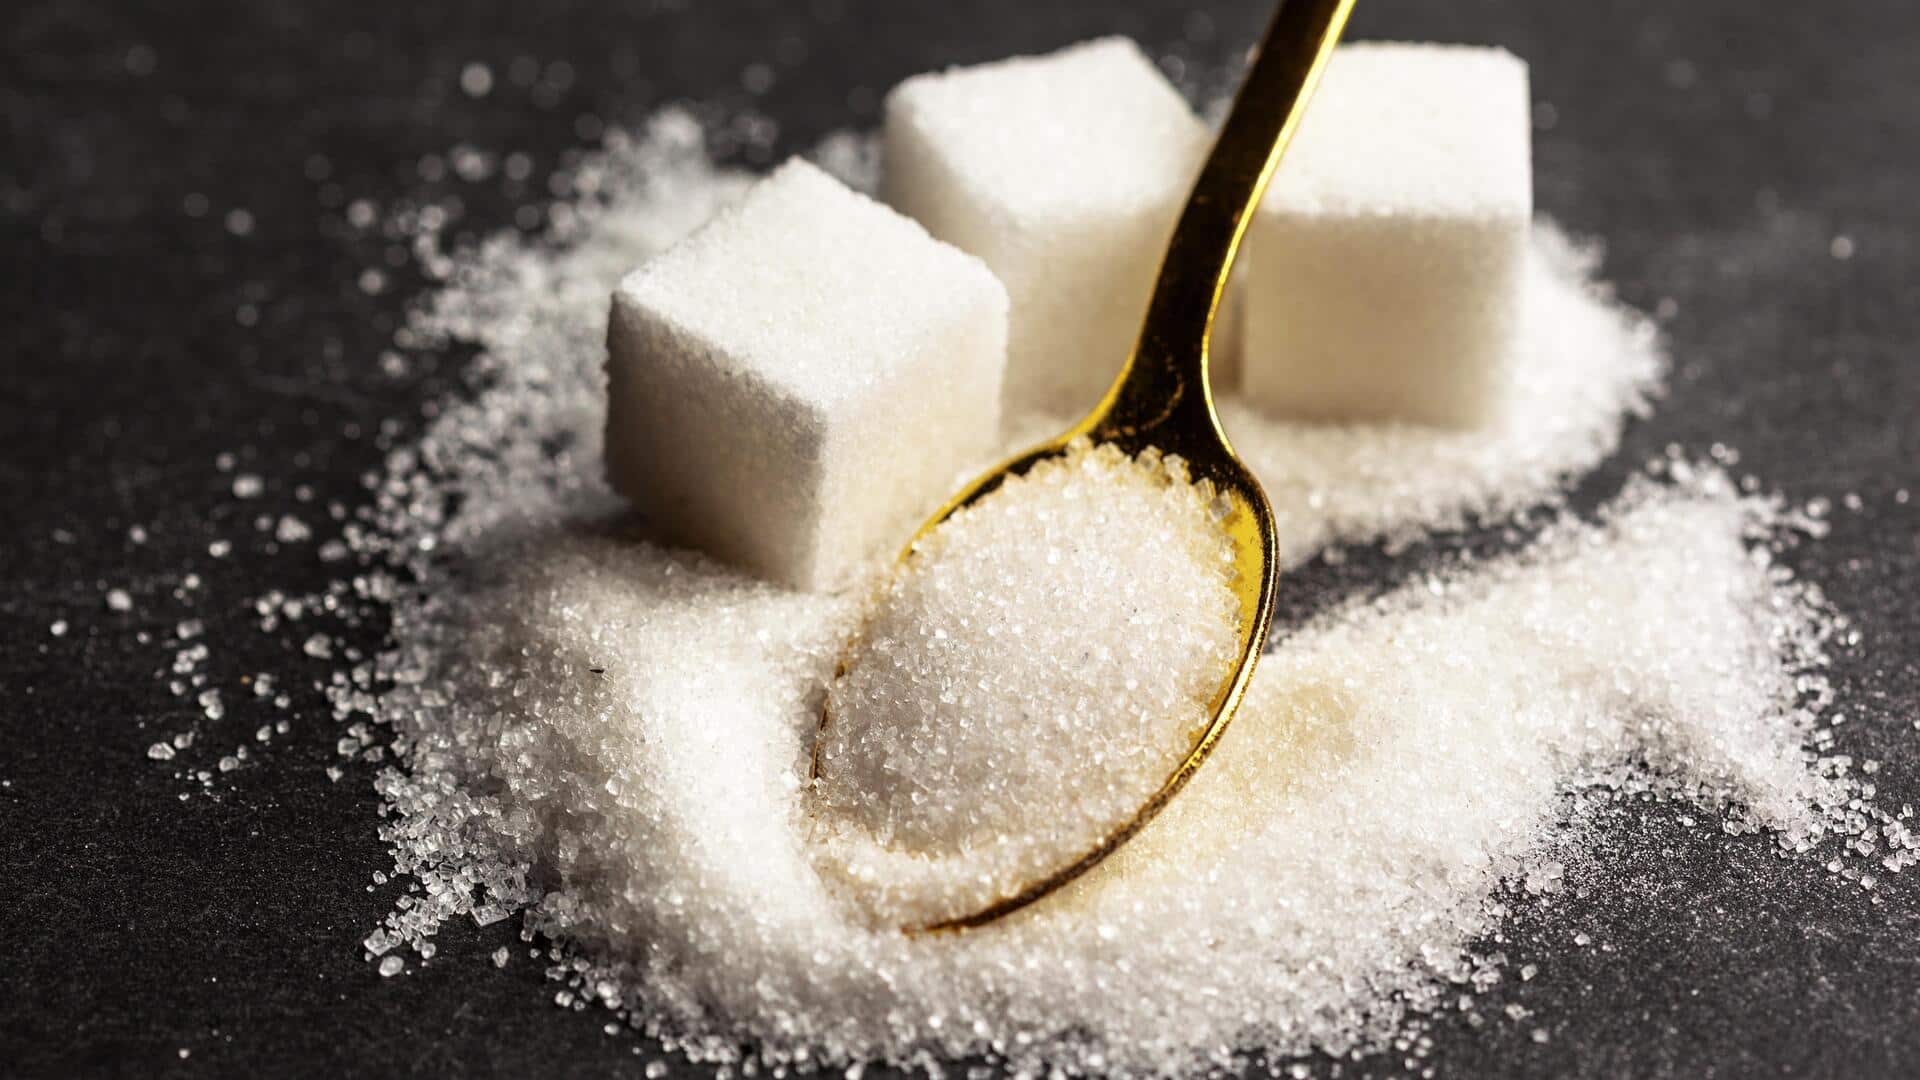 New sugar content guidelines to affect packaged foods, beverages